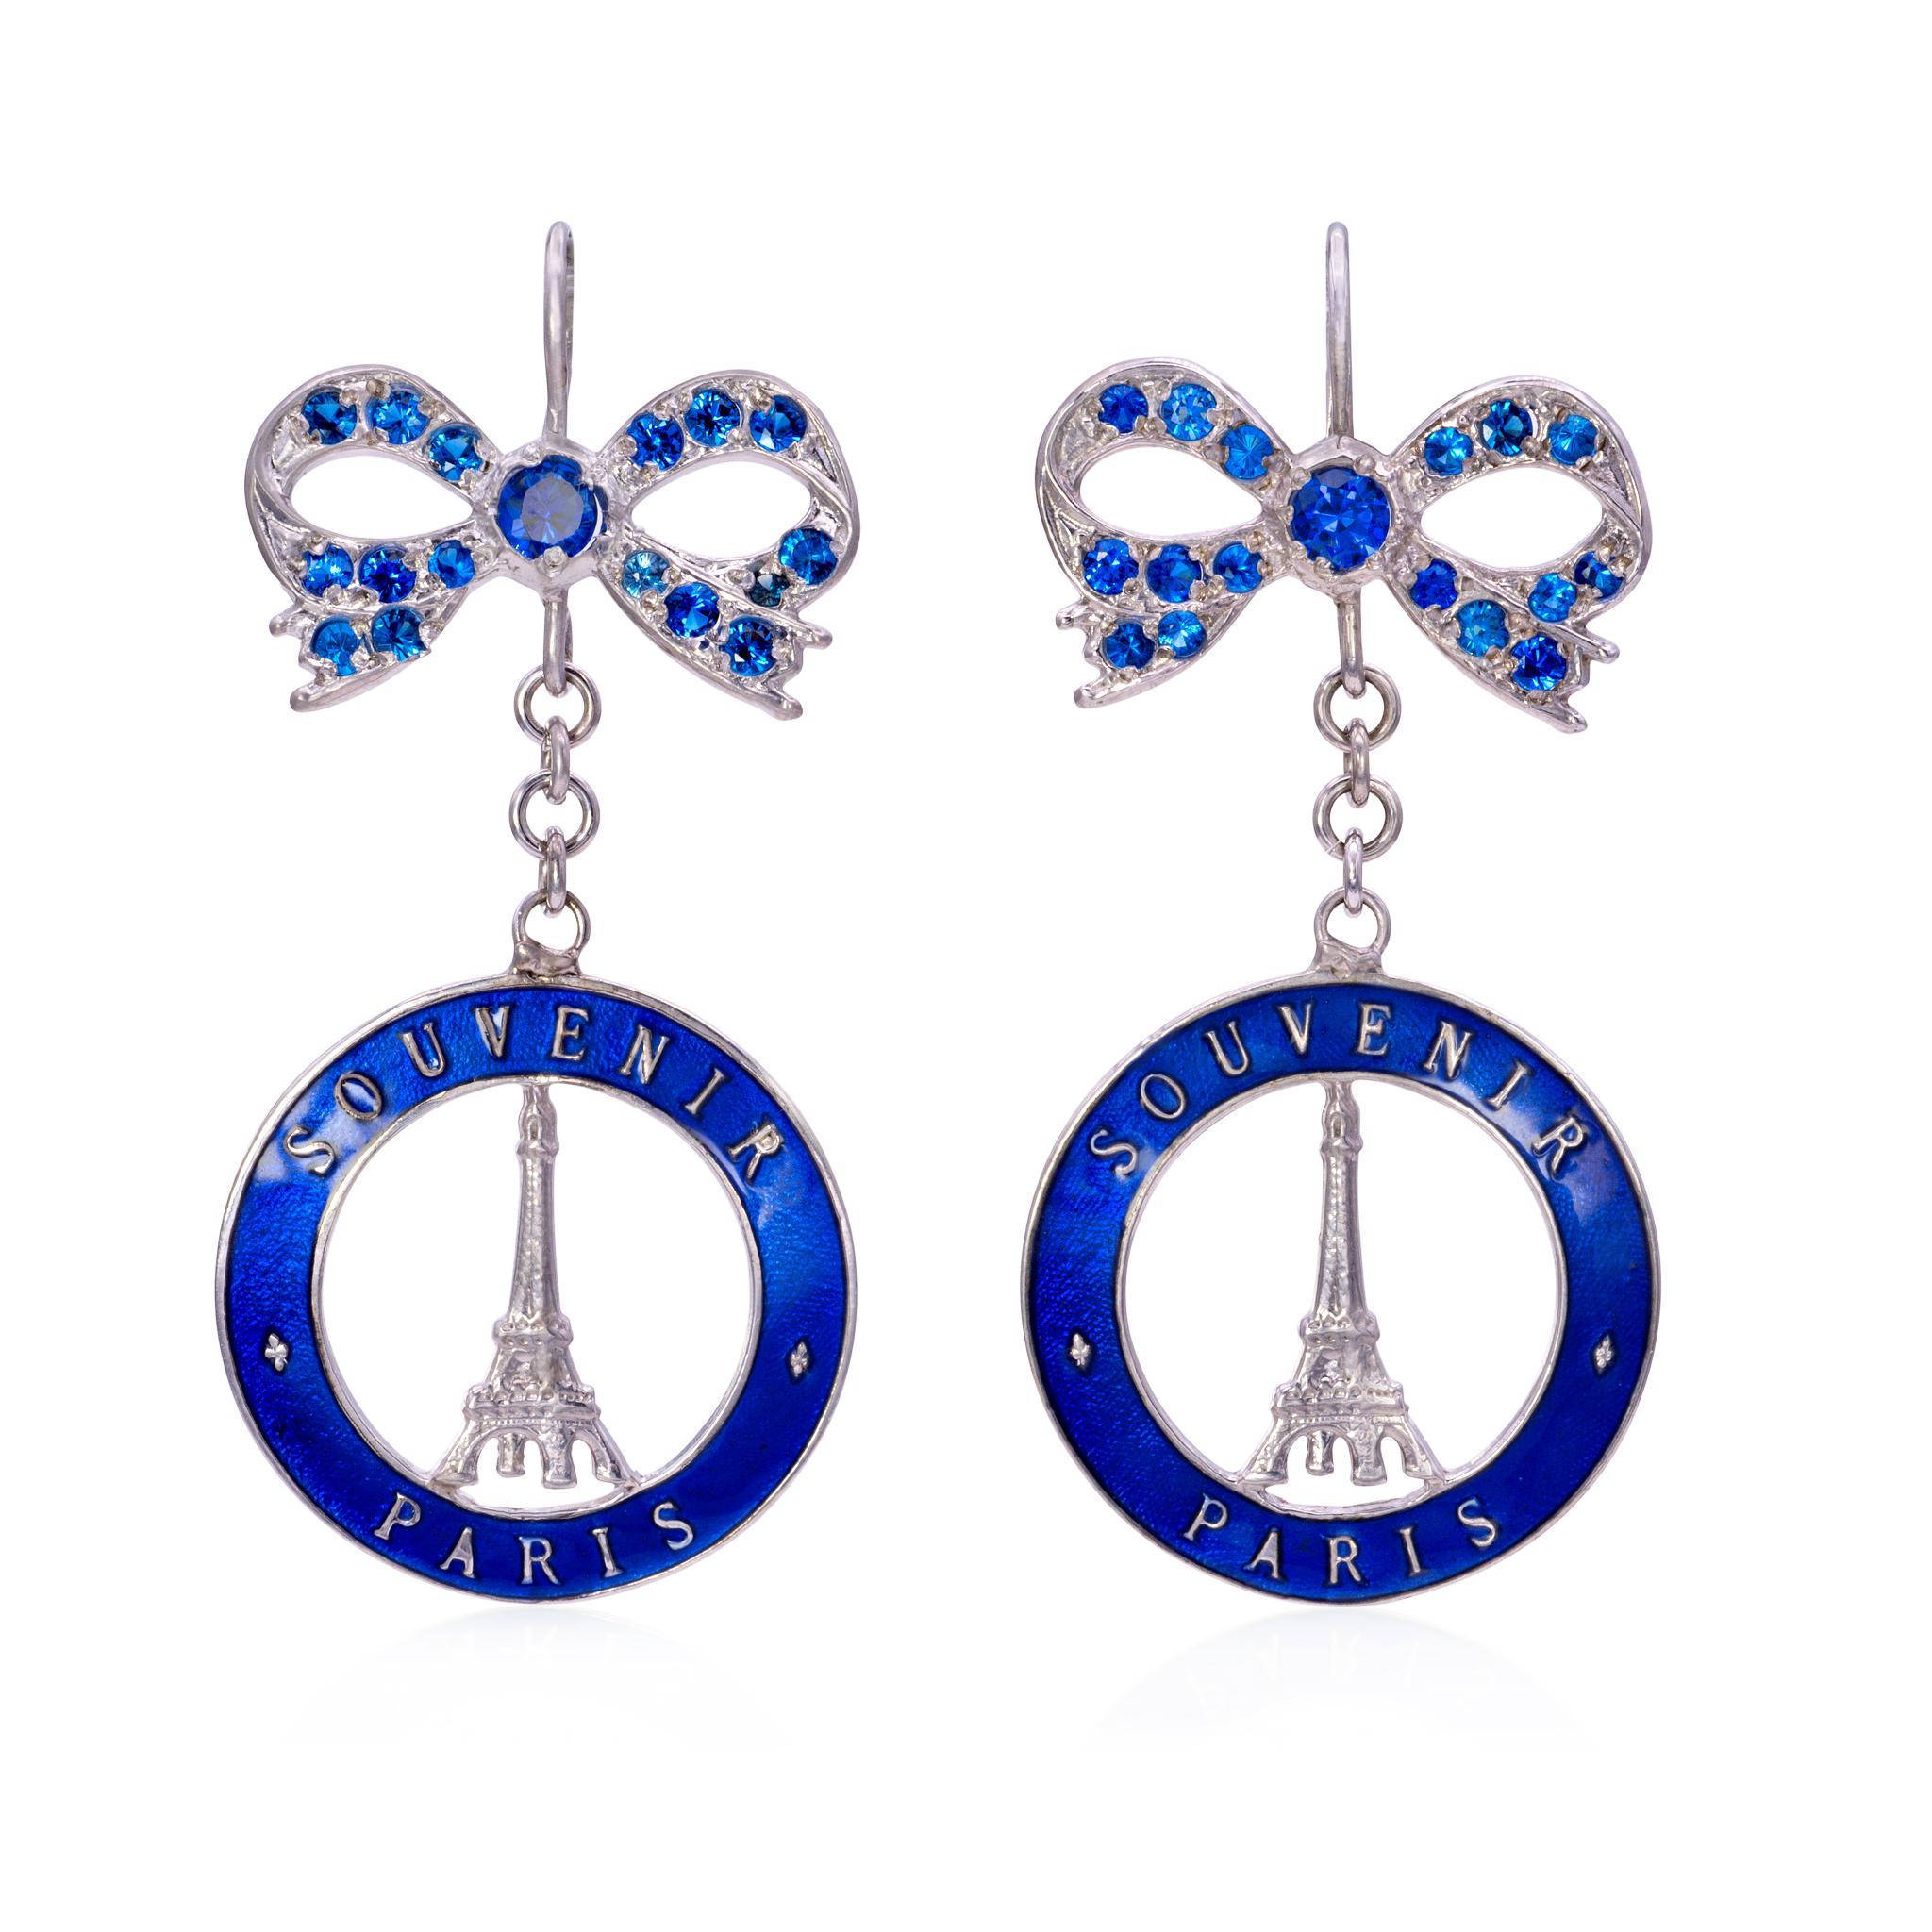 Souvenir de Paris Earrings with Swarovski Crystal bows In New Condition For Sale In New York, NY